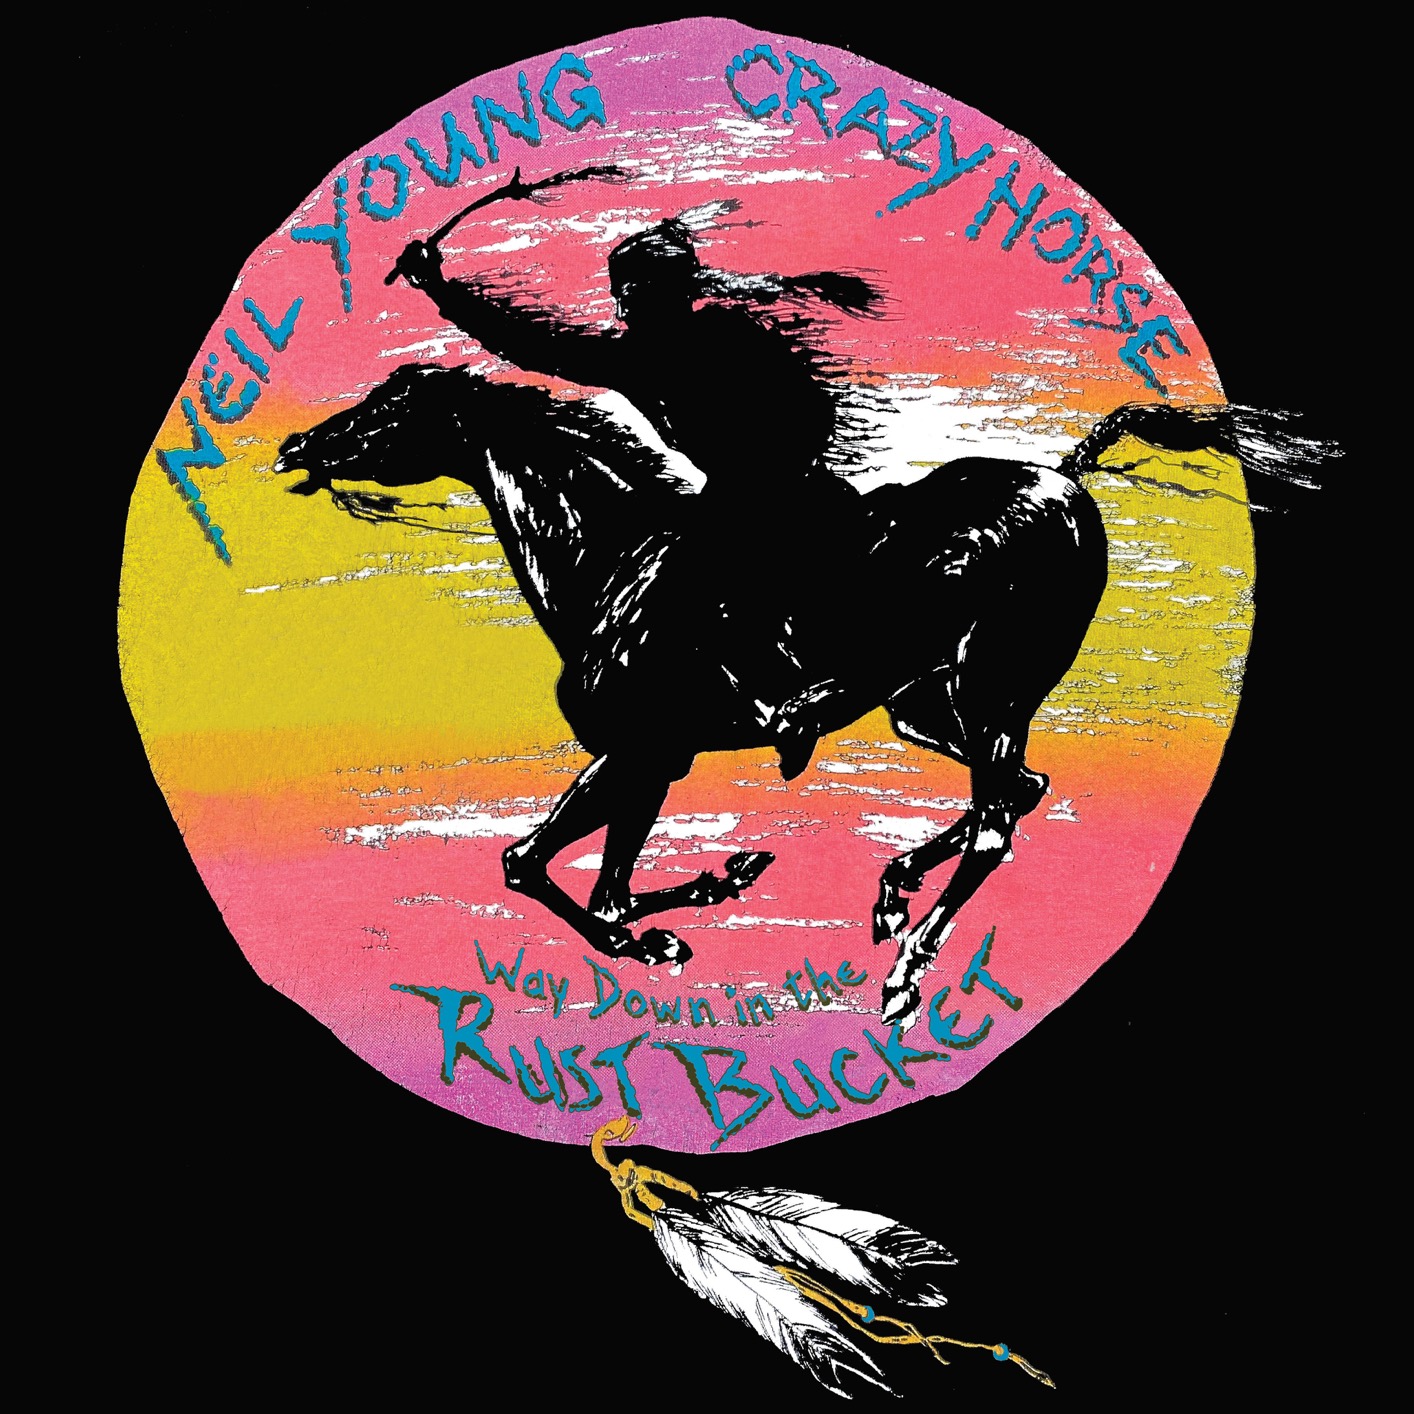 Neil Young & Crazy Horse - 2021 - Way Down In The Rust Bucket [2021] 24-192